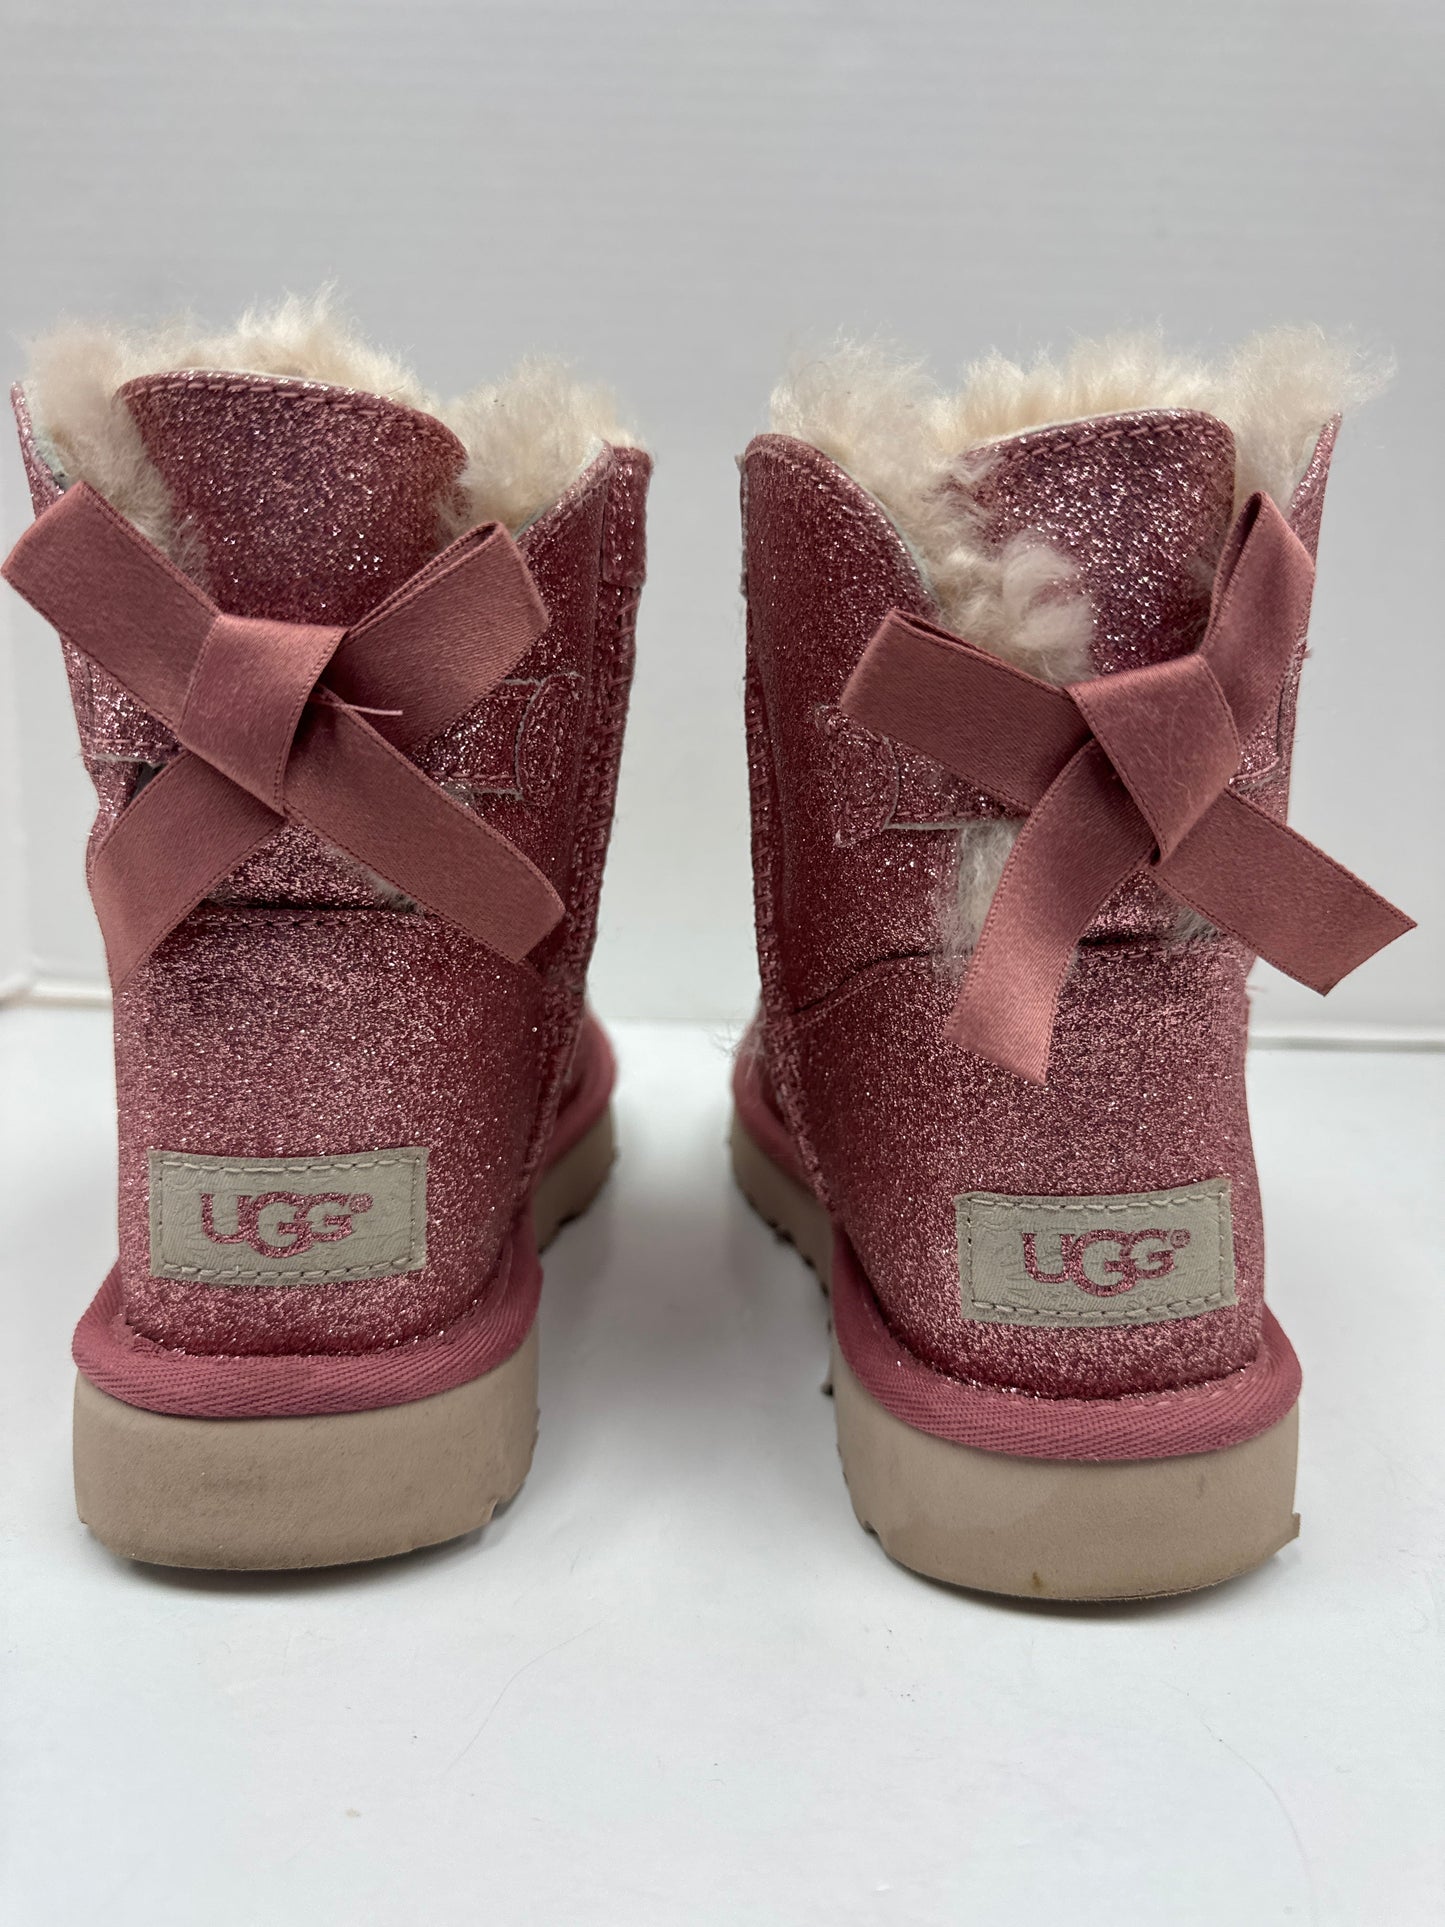 Boots Ankle Flats By Ugg  Size: 6